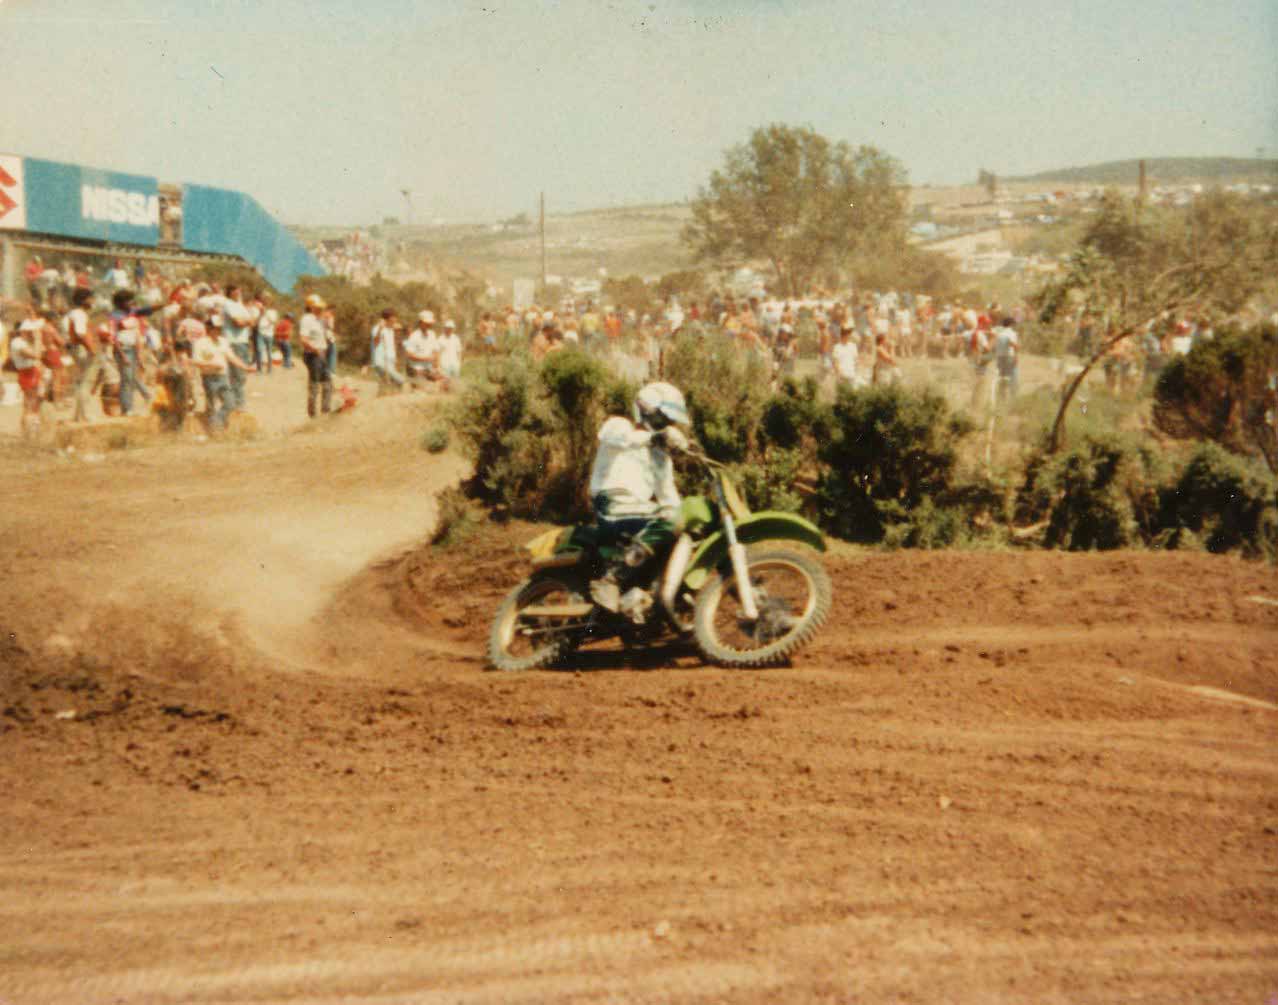 motocross pic2 from KandL